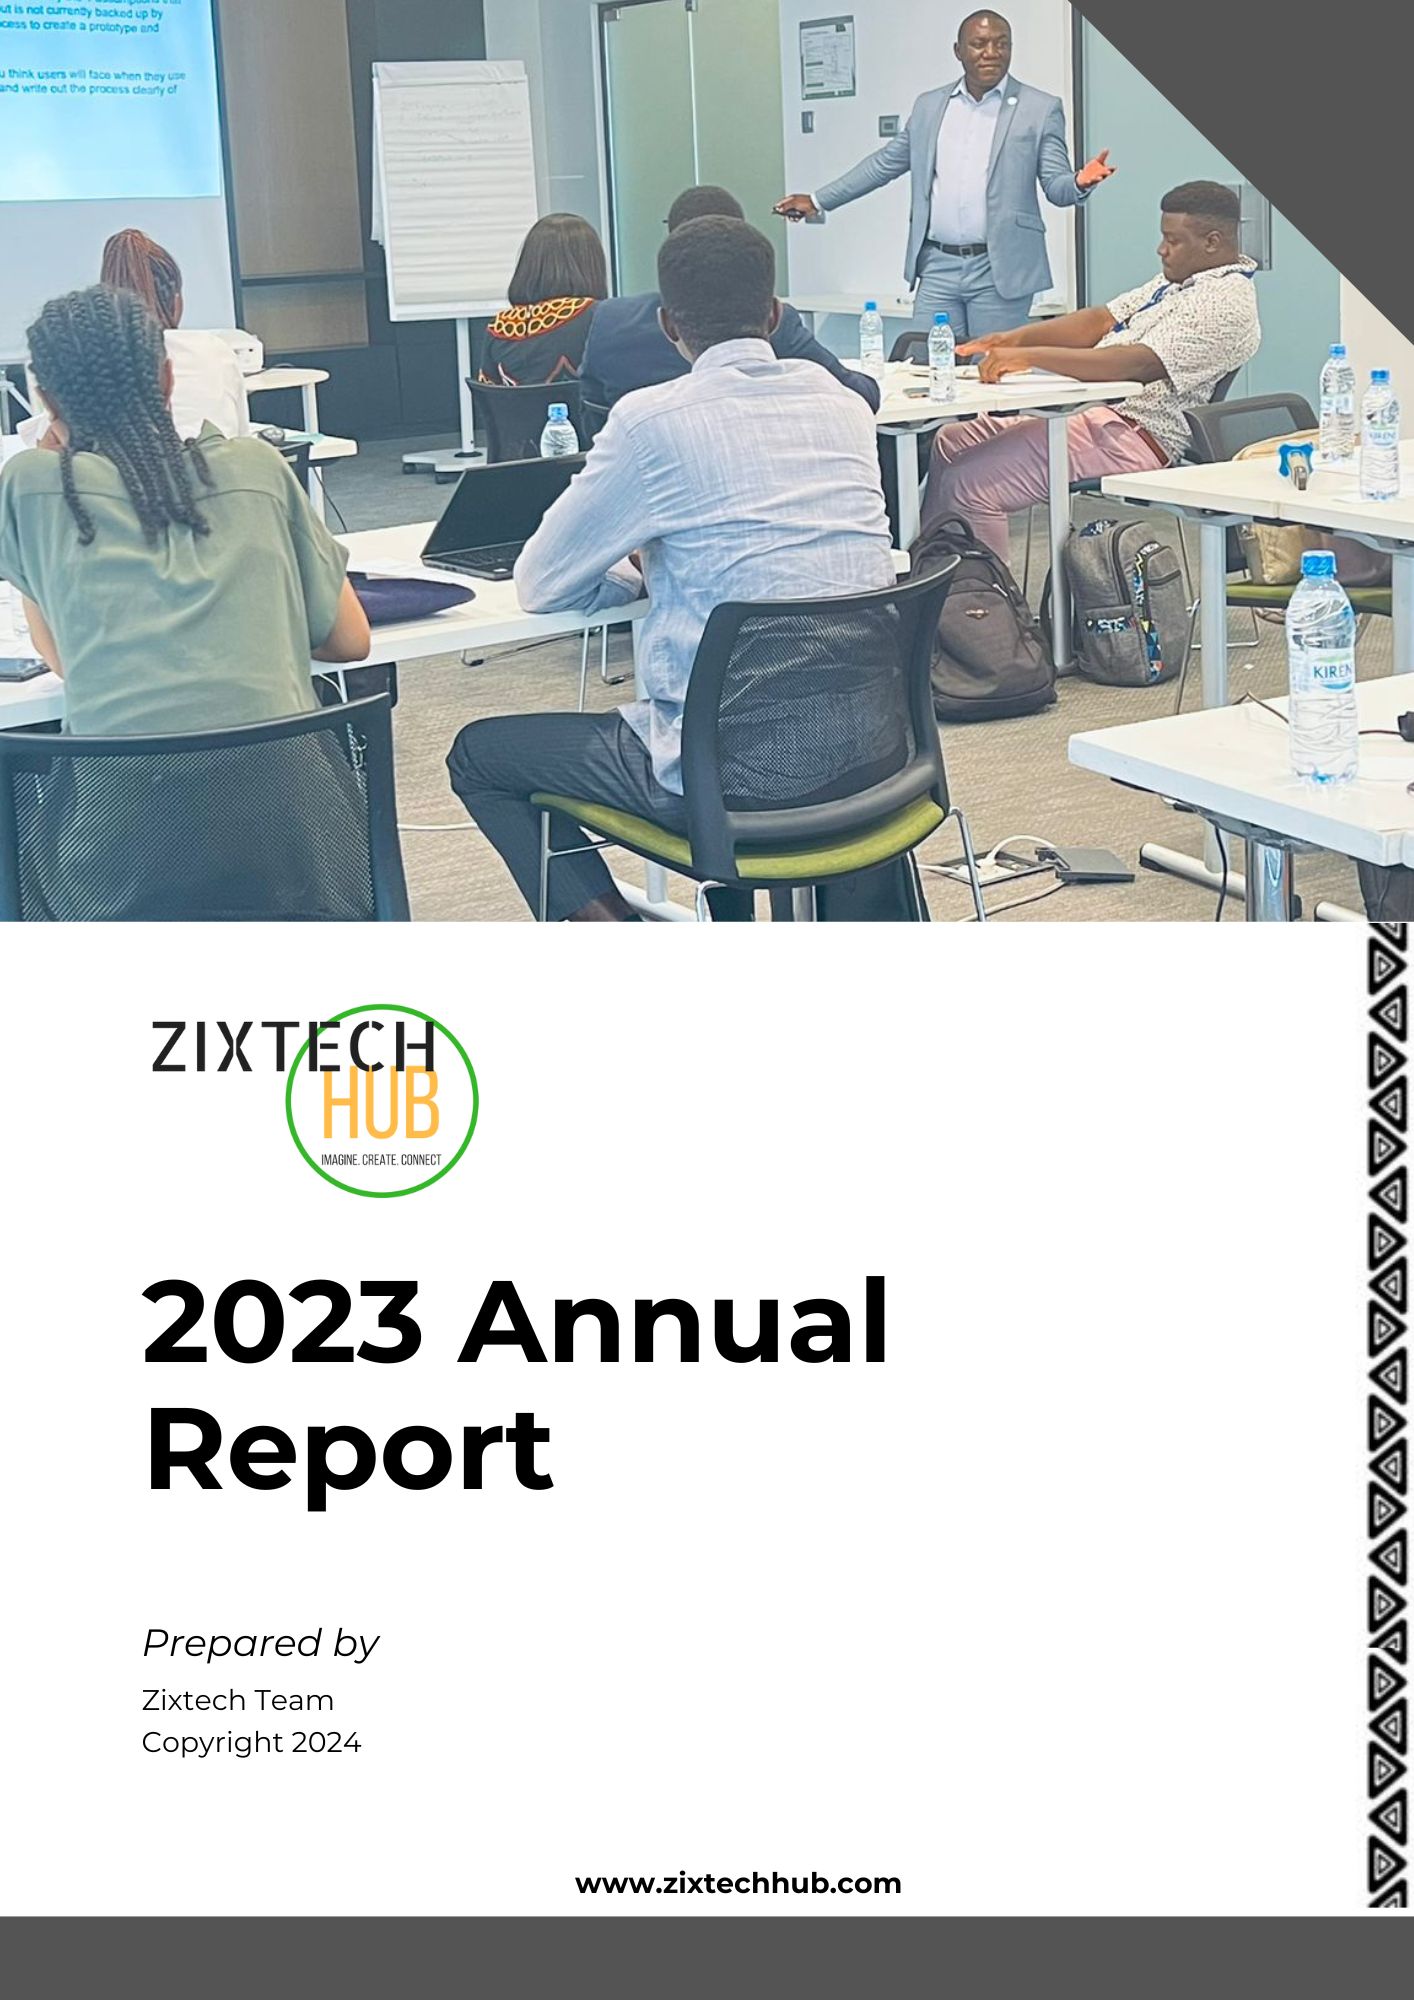 Release of Zixtech HUB Annual Report 2023